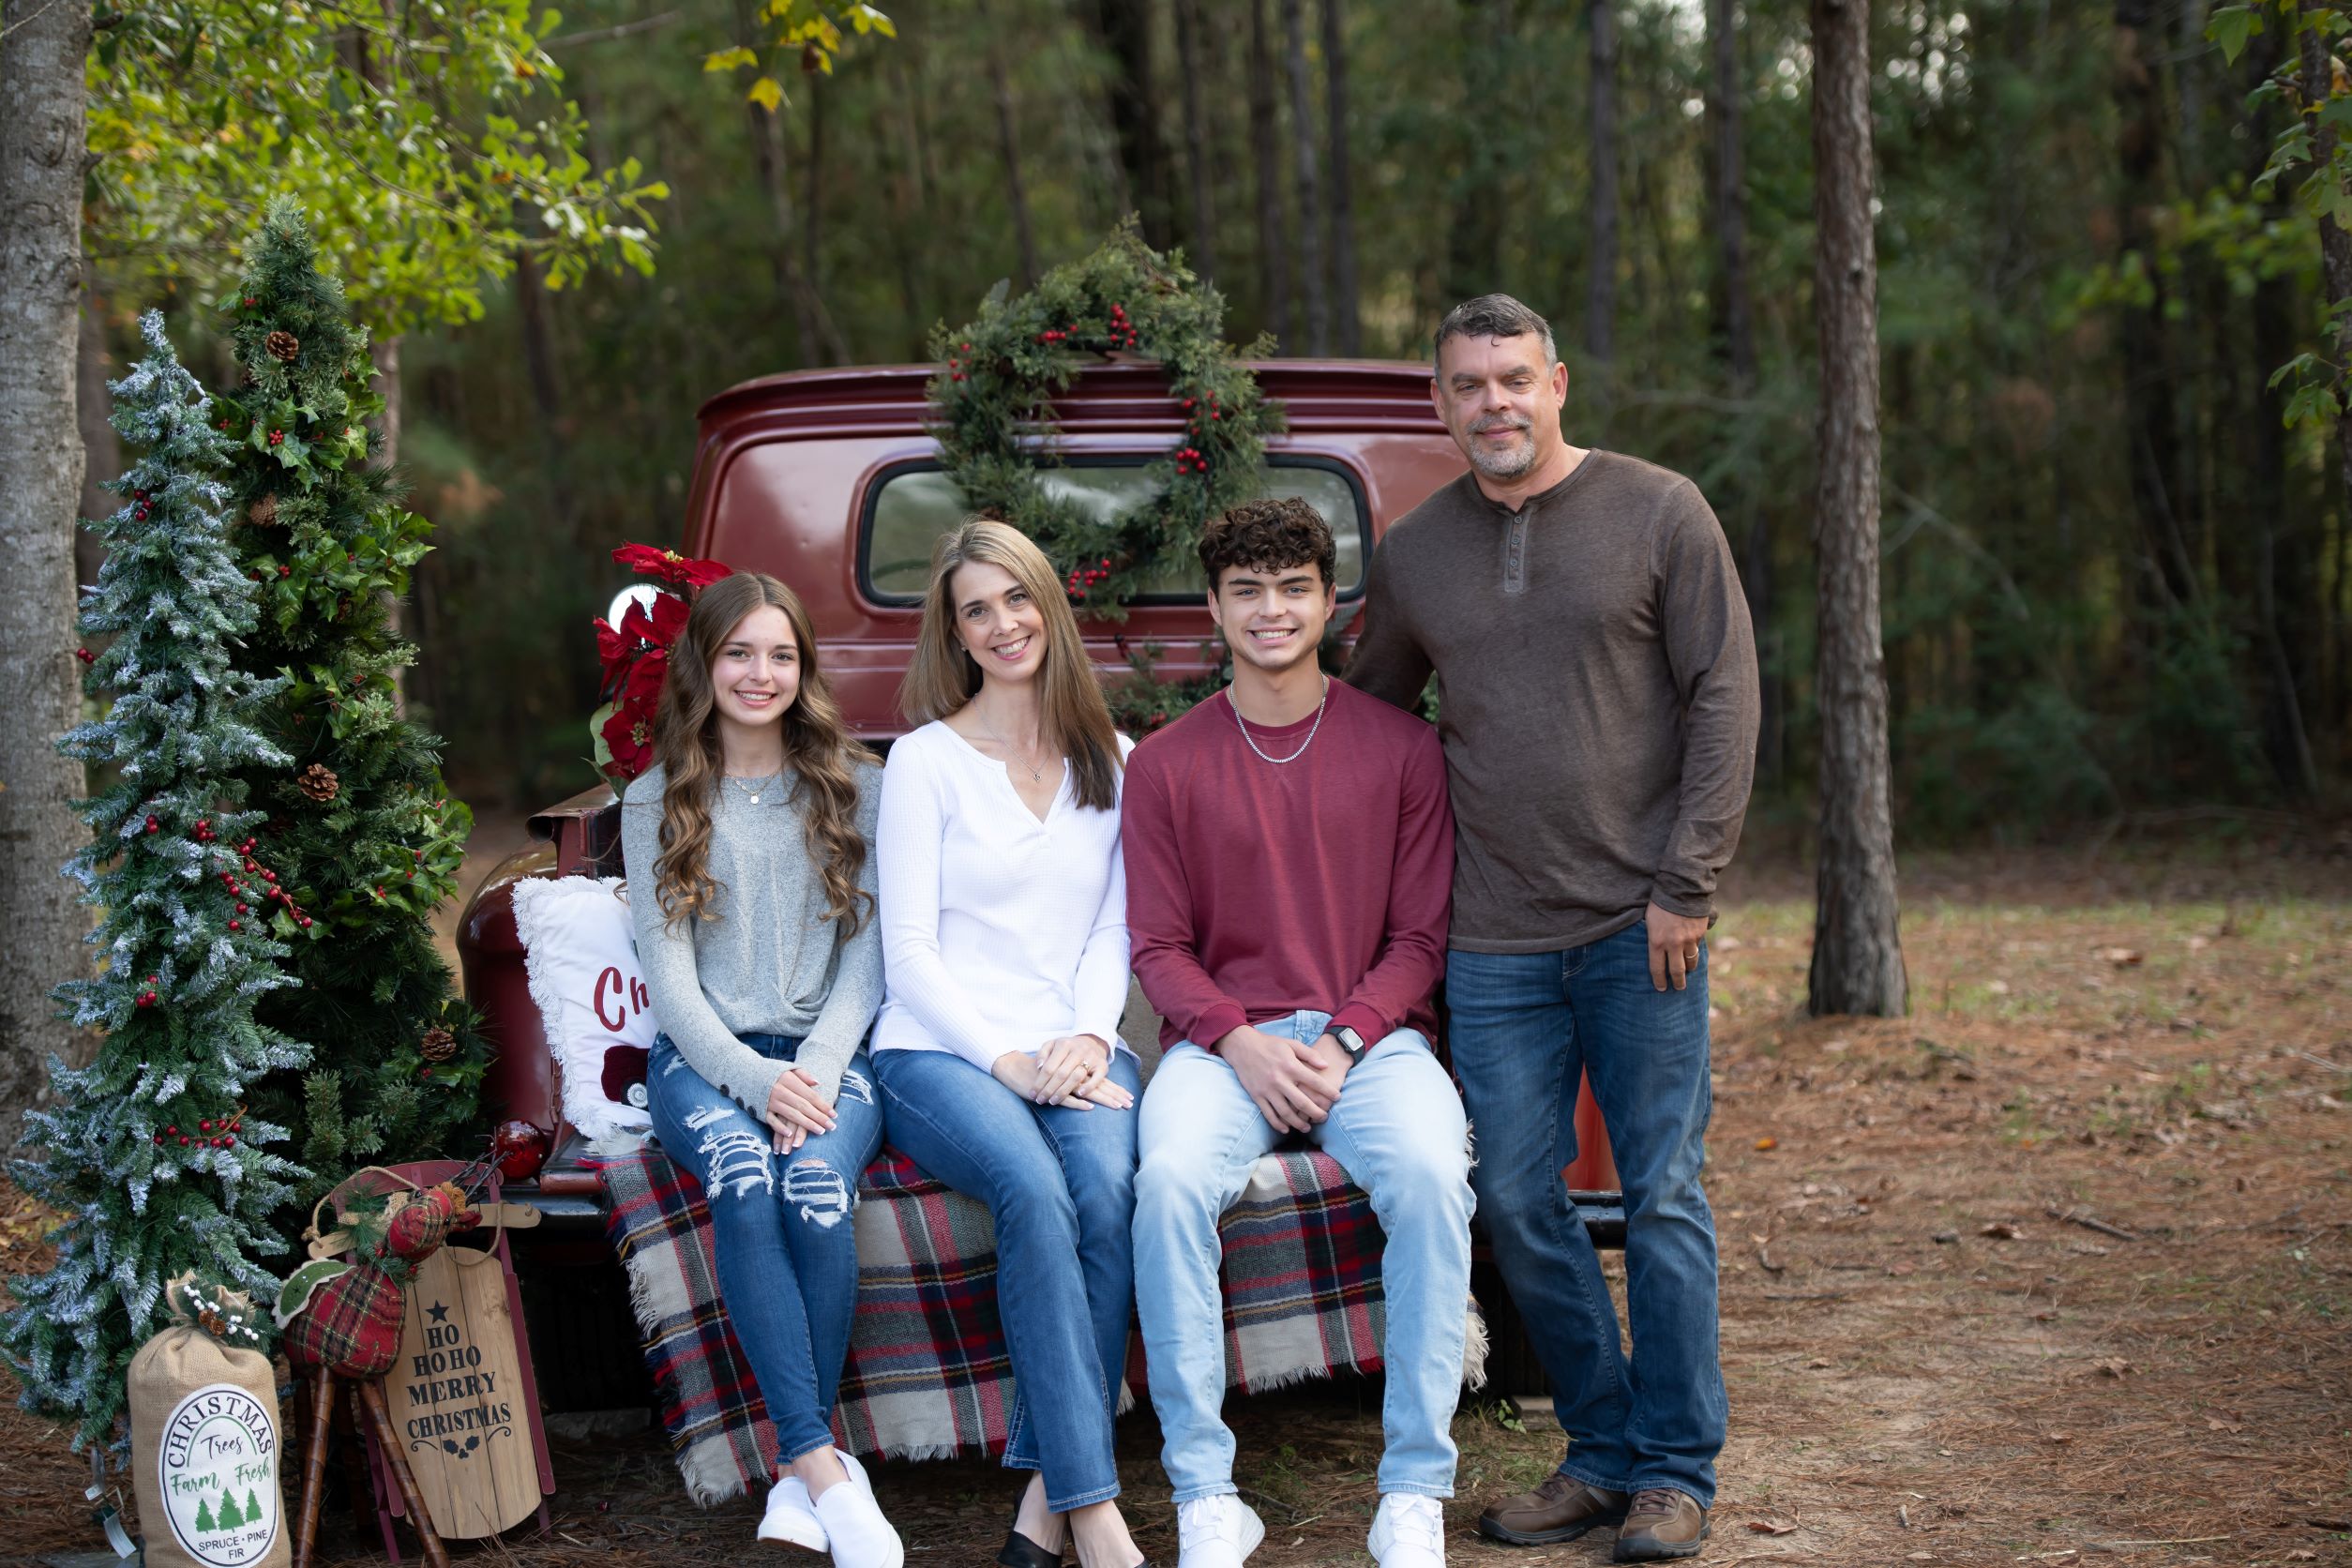 Family picture in forest with Christmas decor